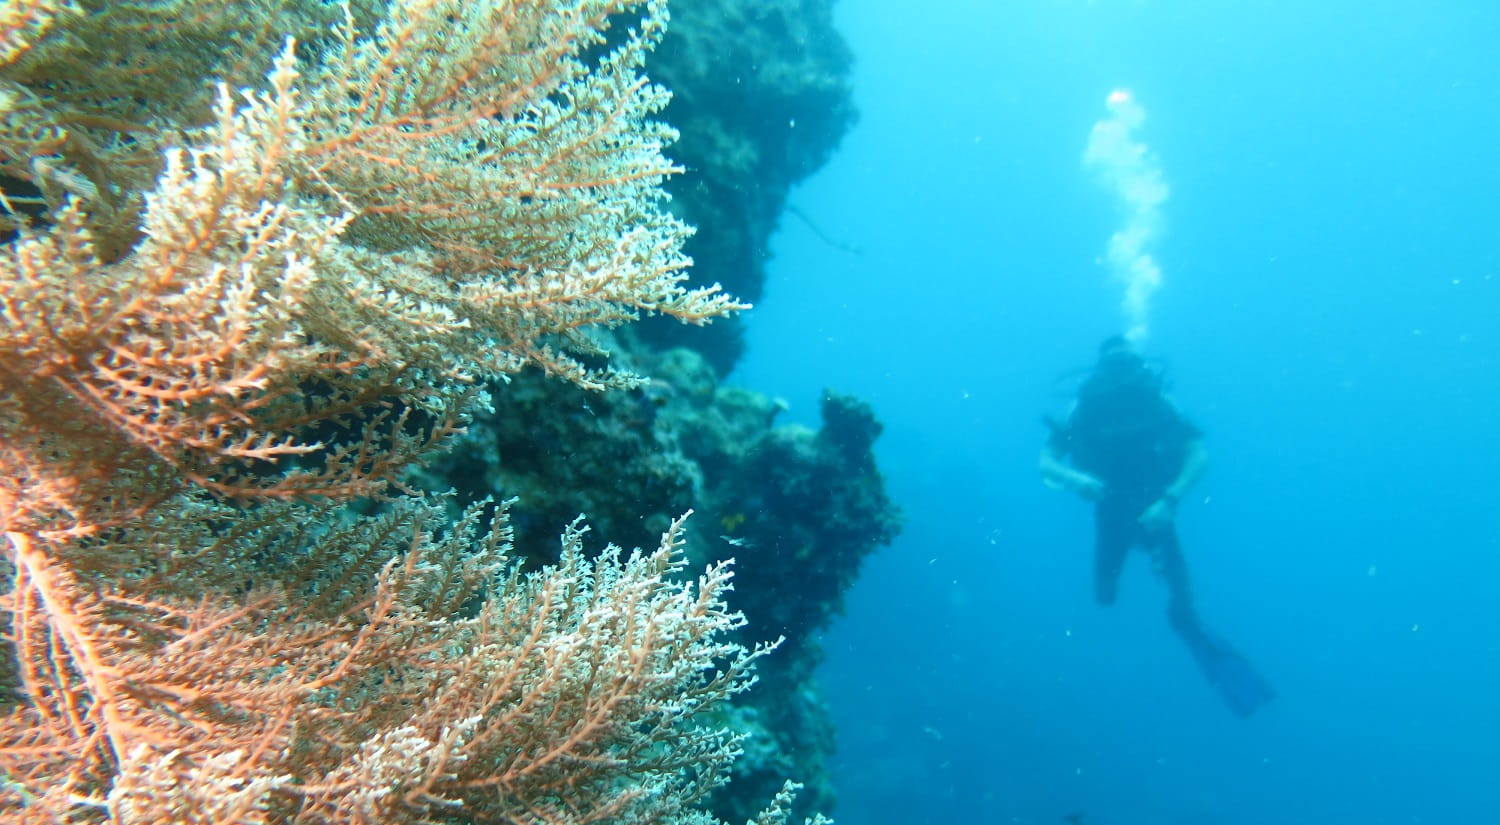 A underwater photo showing a diver next to some coral reef in yellow and orange.